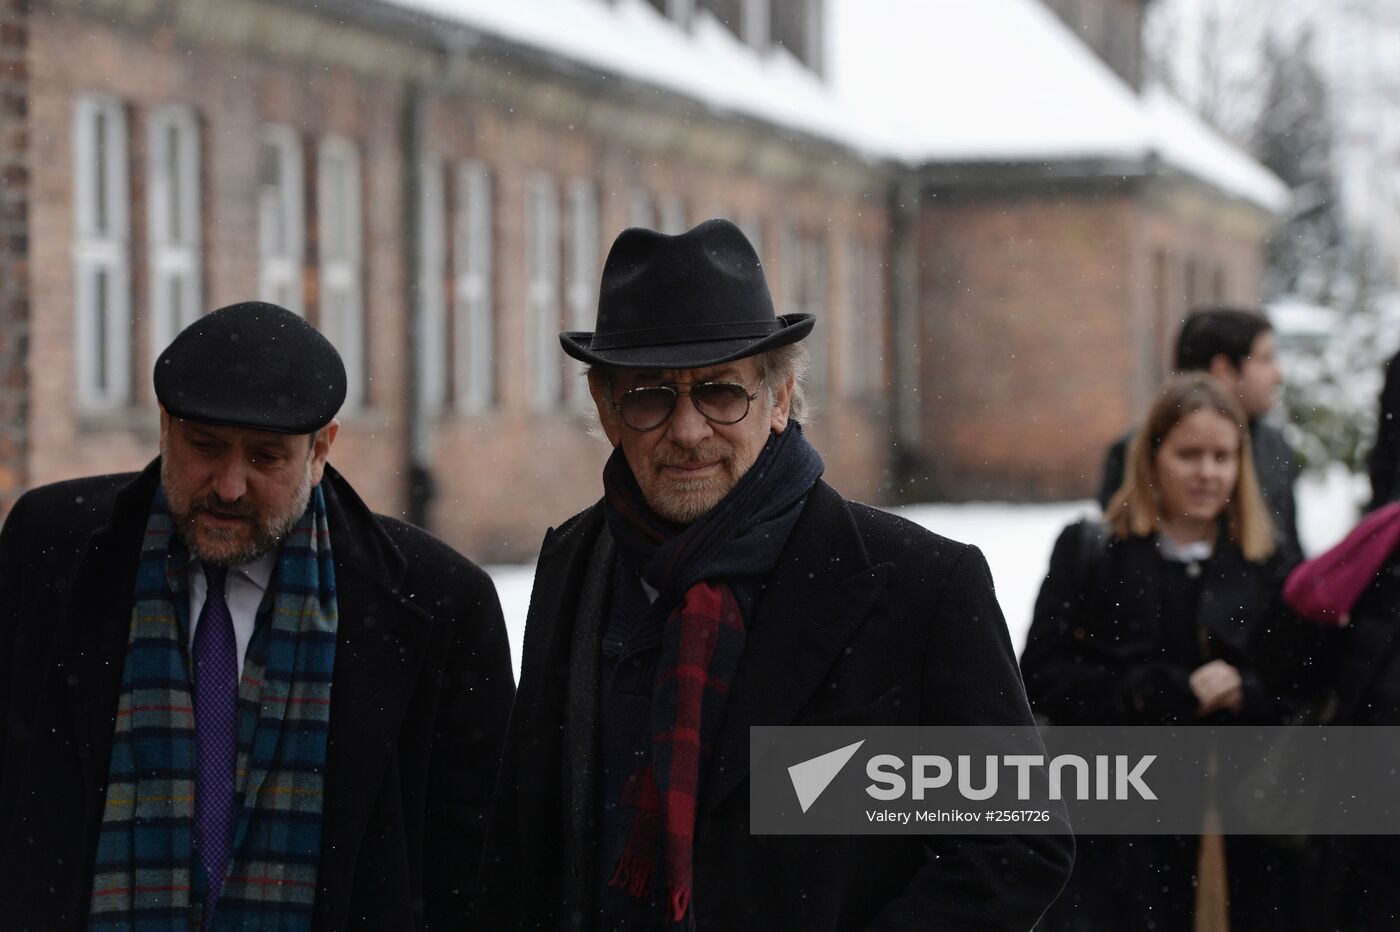 The 70th anniversary of liberating inmates of the Auschwitz-Birkenau concentration camp